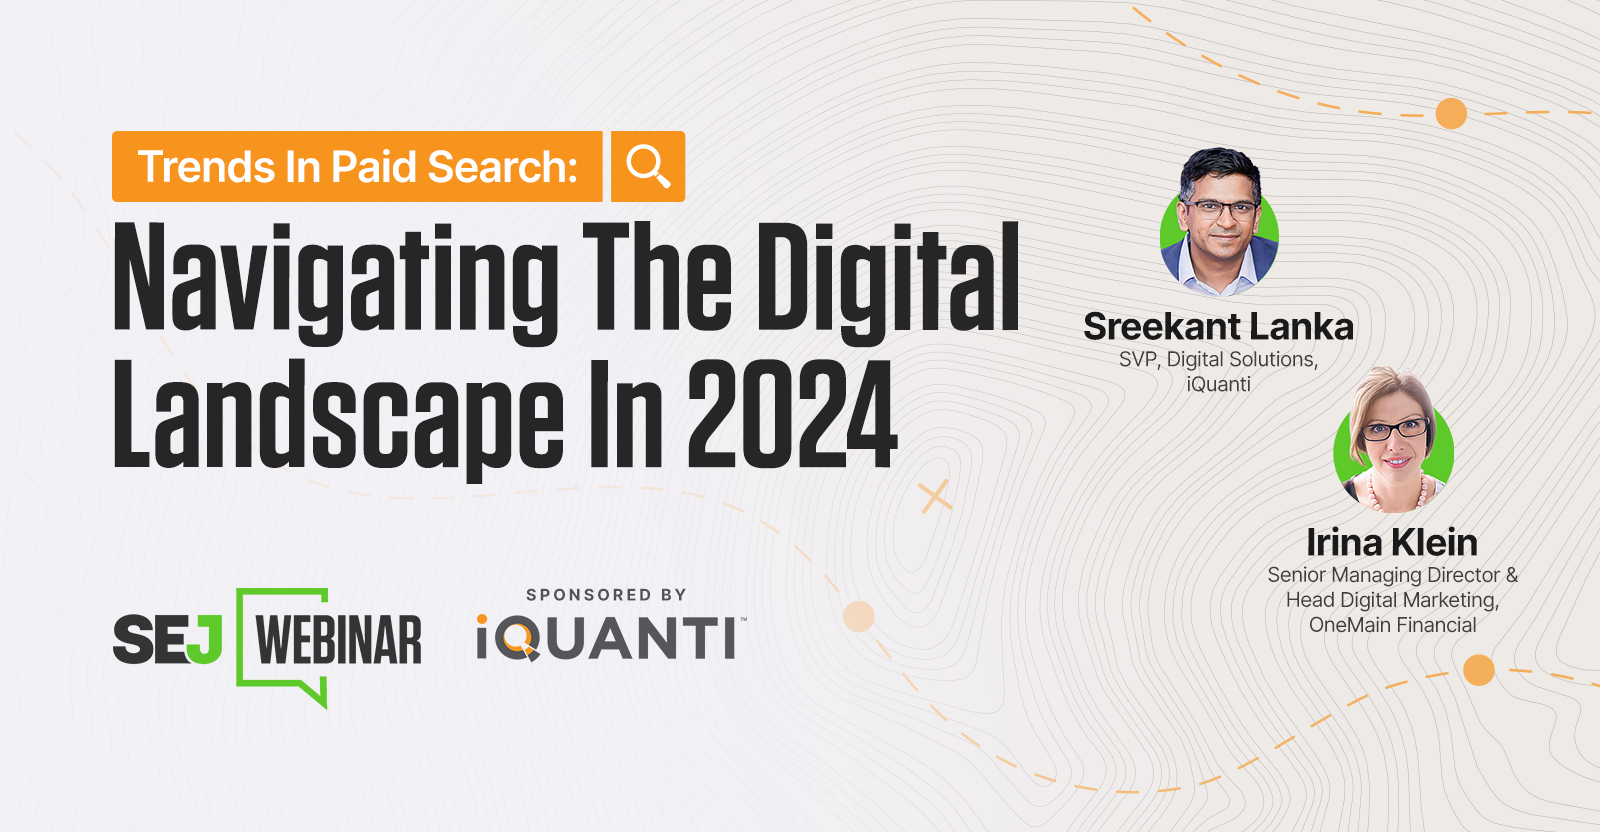 Trends In Paid Search: Navigating The Digital Landscape In 2024 Webinar